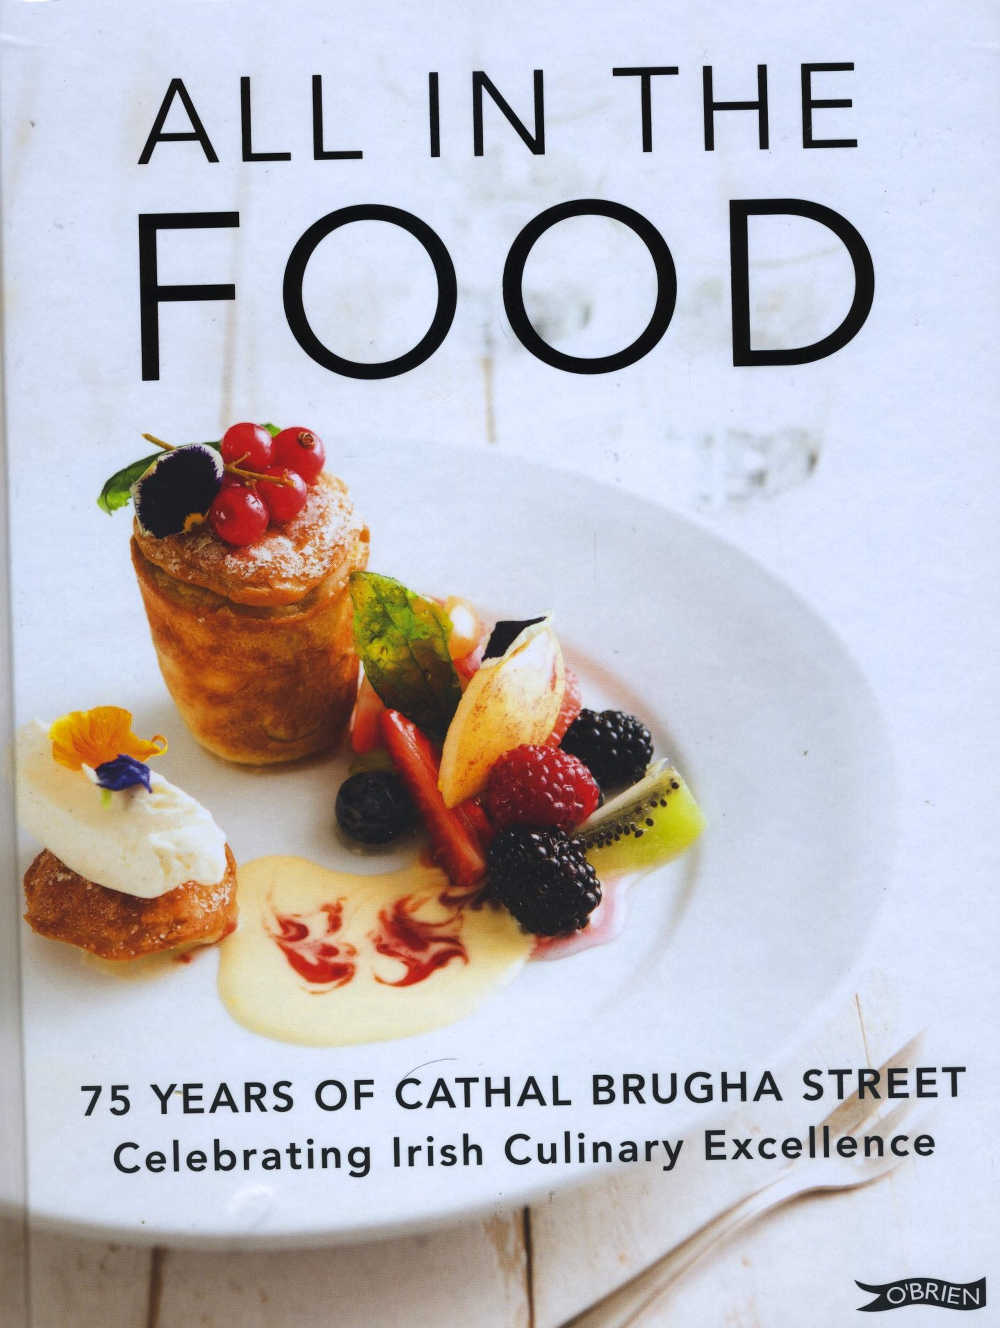 ALL IN THE FOOD - 75 YEARS OF CATHAL BRUGHA STREET, Celebrating Irish Culinary Excellence (O’Brien Press, hardback; 224pp; €24.99/£19.99)